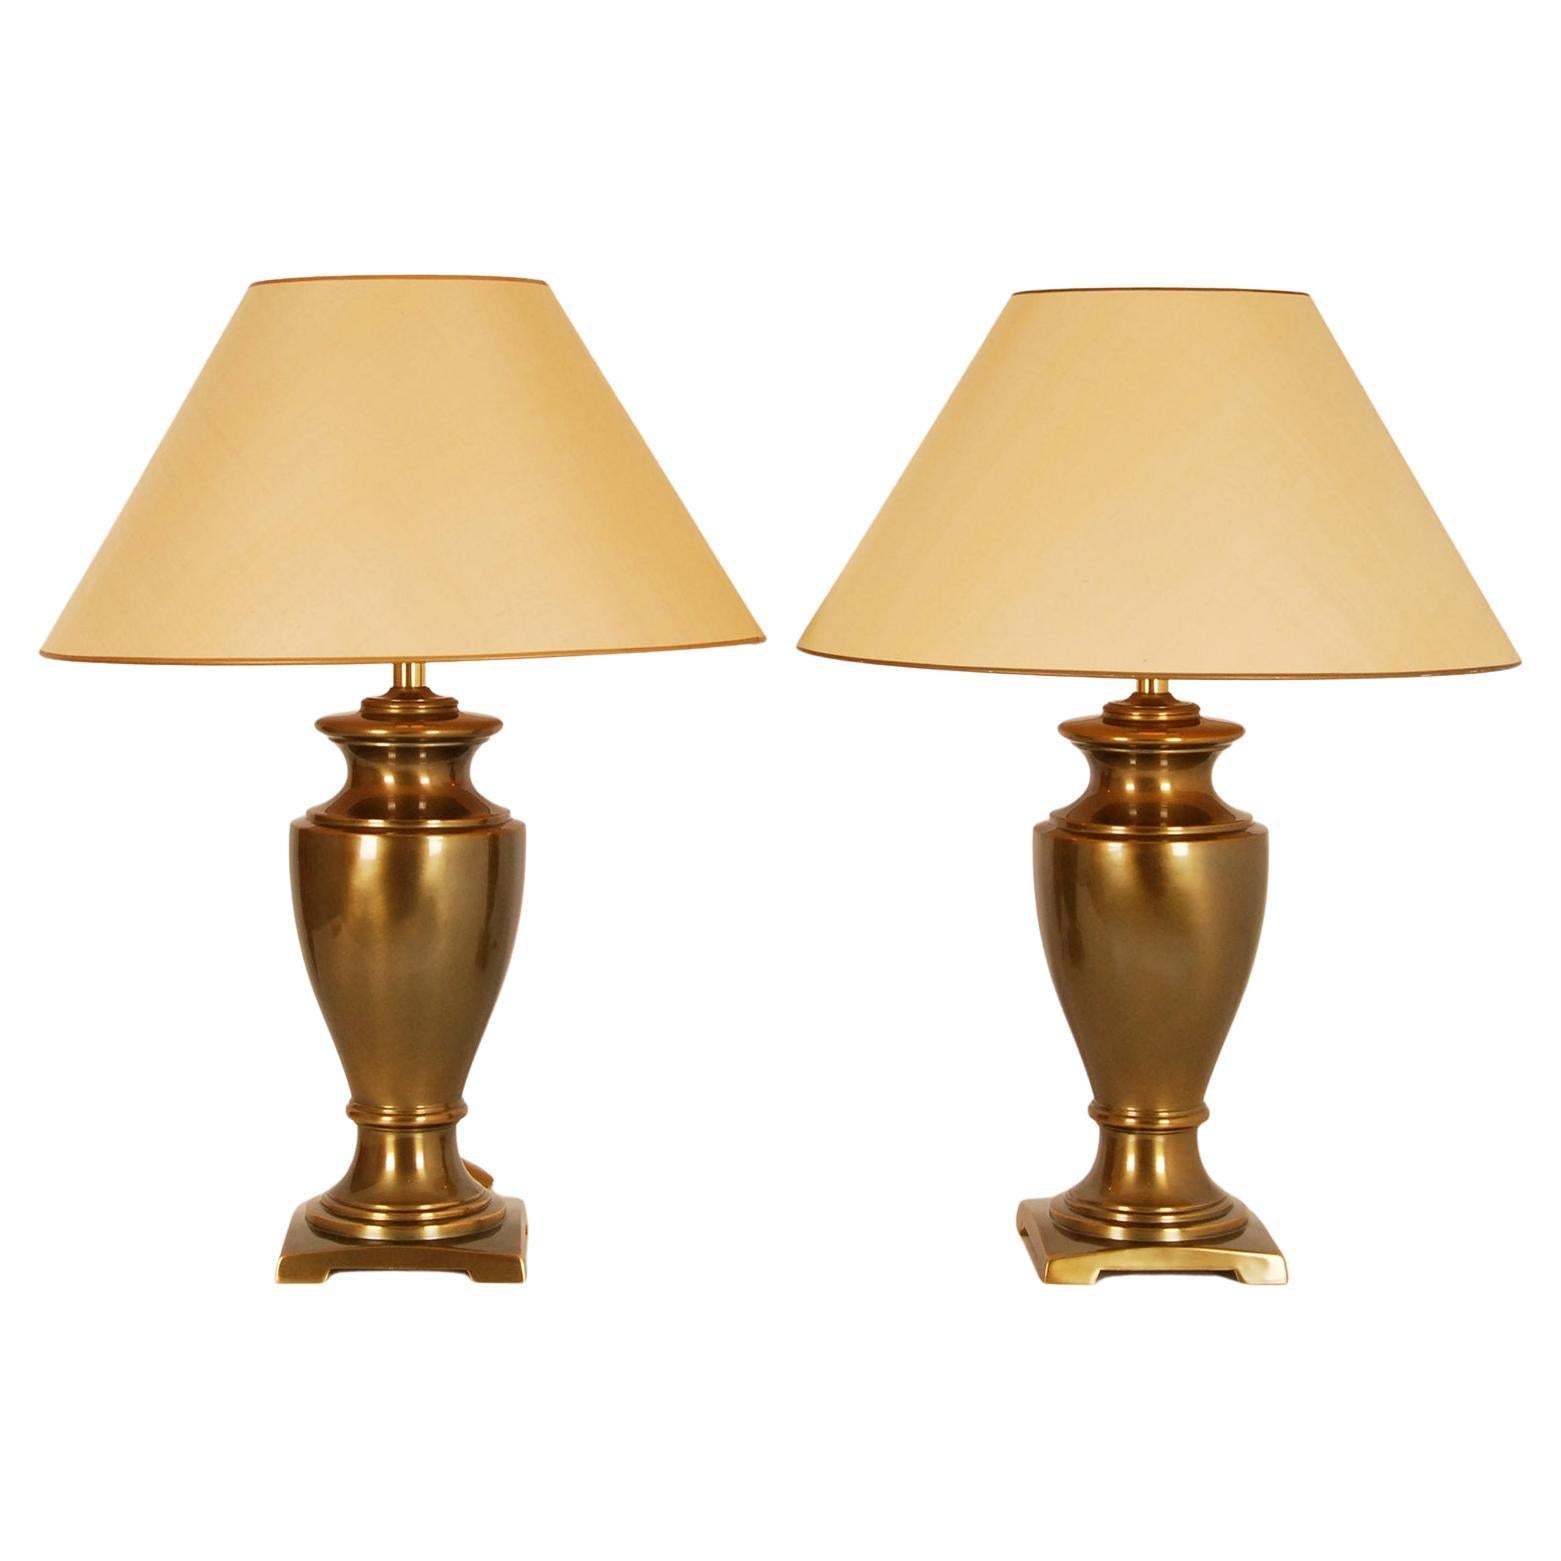 Vintage 1970s Gold Gilt Brass Neoclassical Vase Table Lamps, a Pair